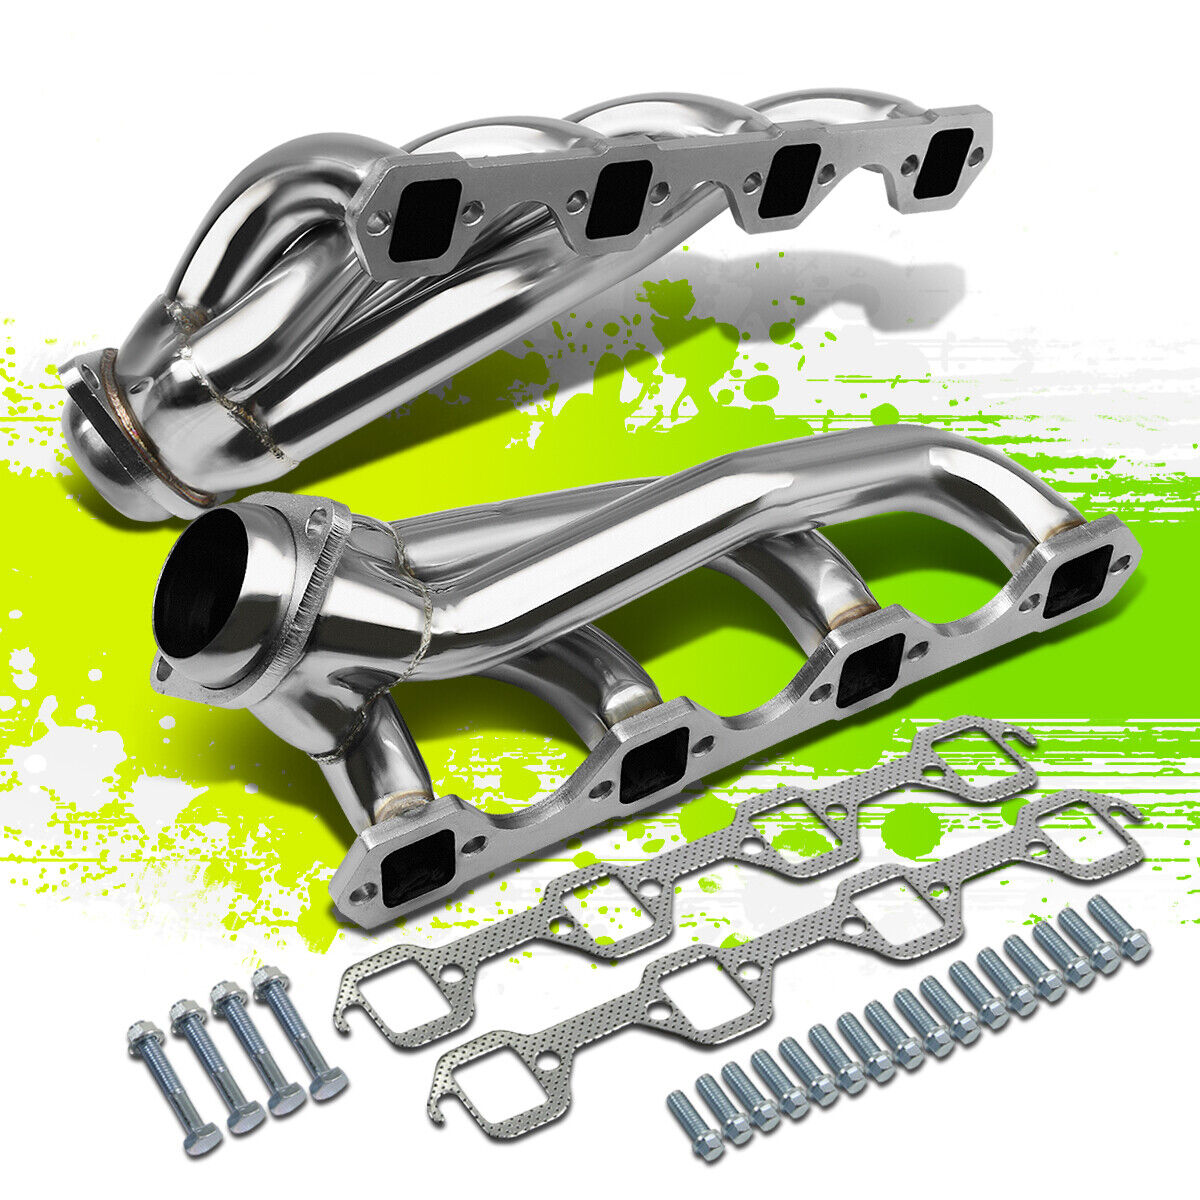 Stainless Steel Shorty Exhaust Header Manifold for Ford Mustang 5.0L V8 79-93